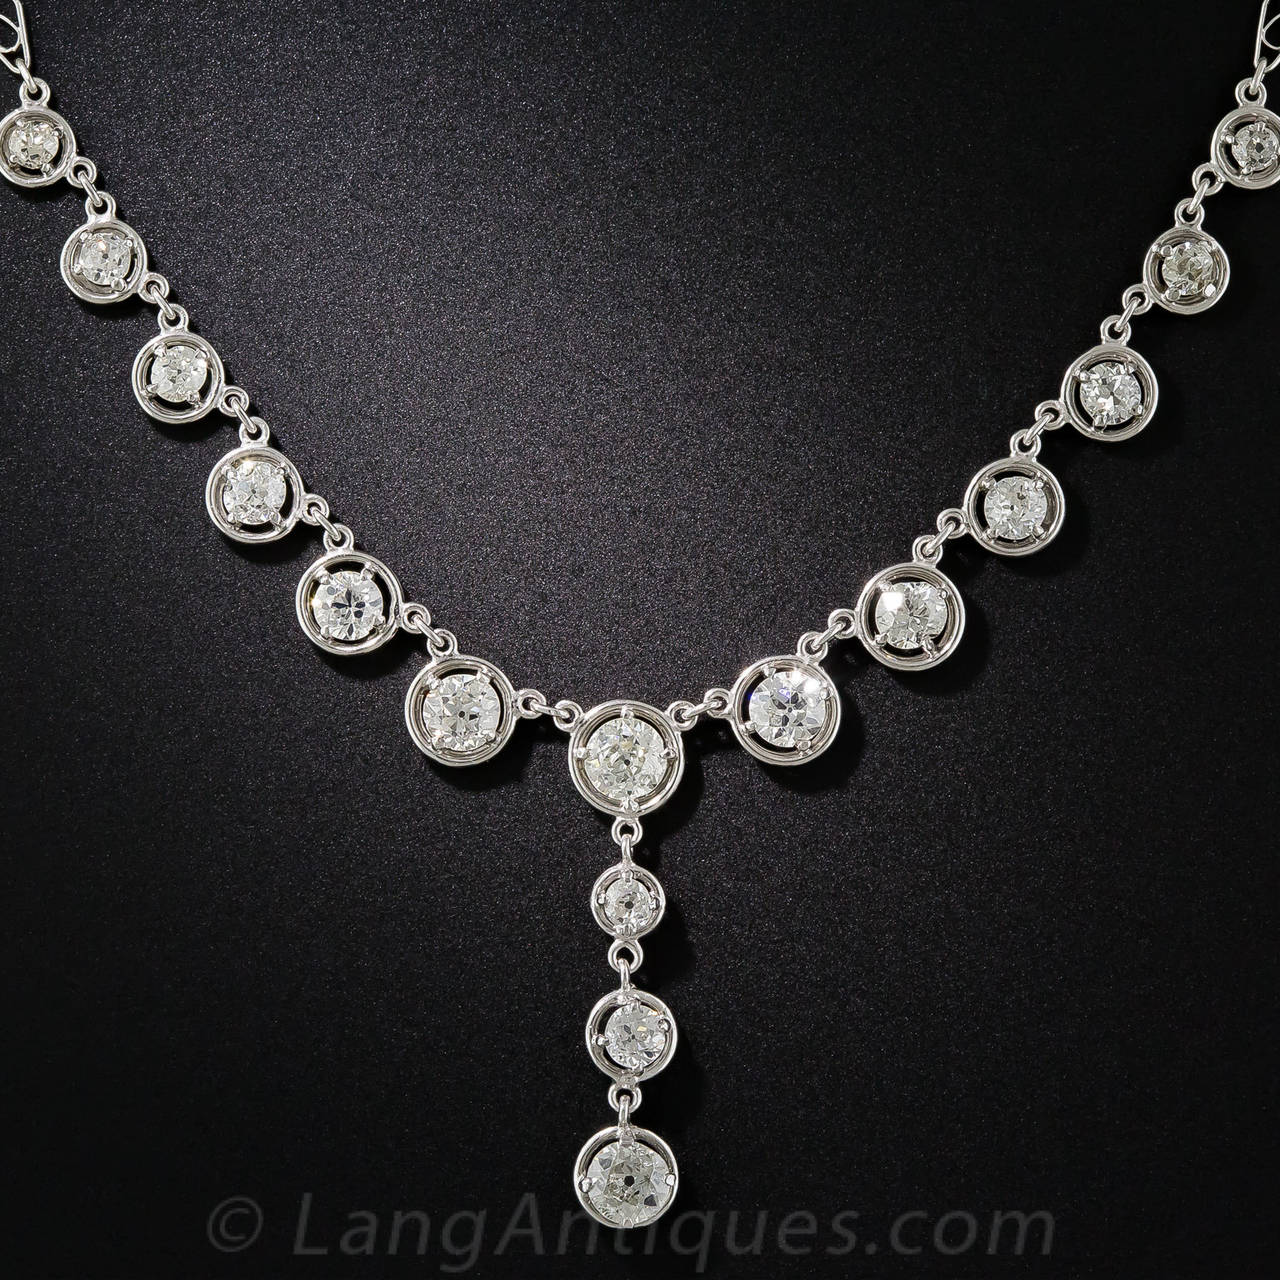 Masterfully hand fabricated and utterly bedazzling in platinum, this early Art Deco diamond necklace - circa 1920 - sparkles brilliantly with 24 'compass-set' diamonds, totaling 4.15 carats, attached to a diamond studded infinity style chain. The